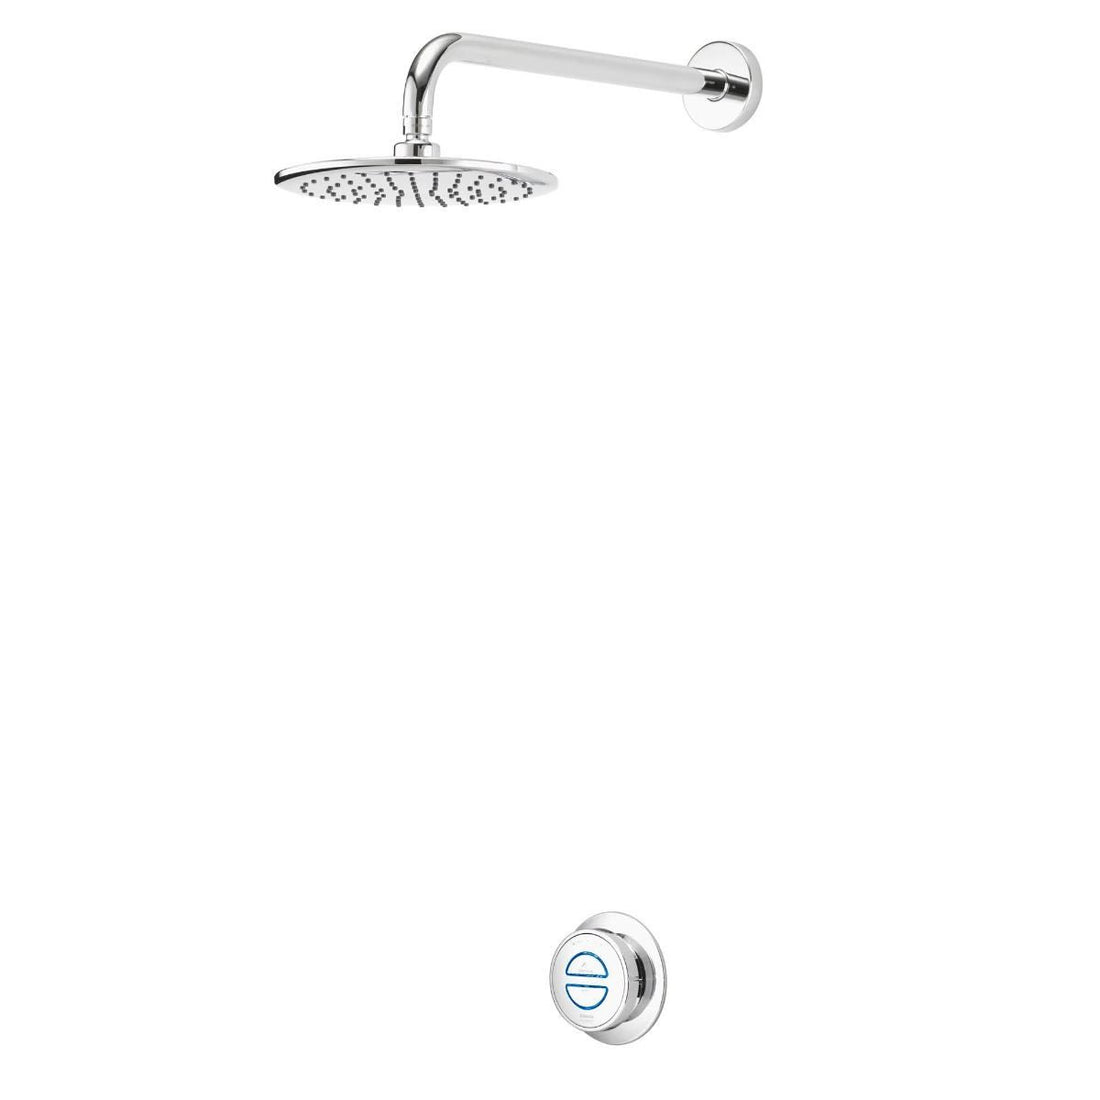 Aqualisa Quartz Classic Smart Shower - Concealed With Wall Fixed Head QZD.A1.BR.20